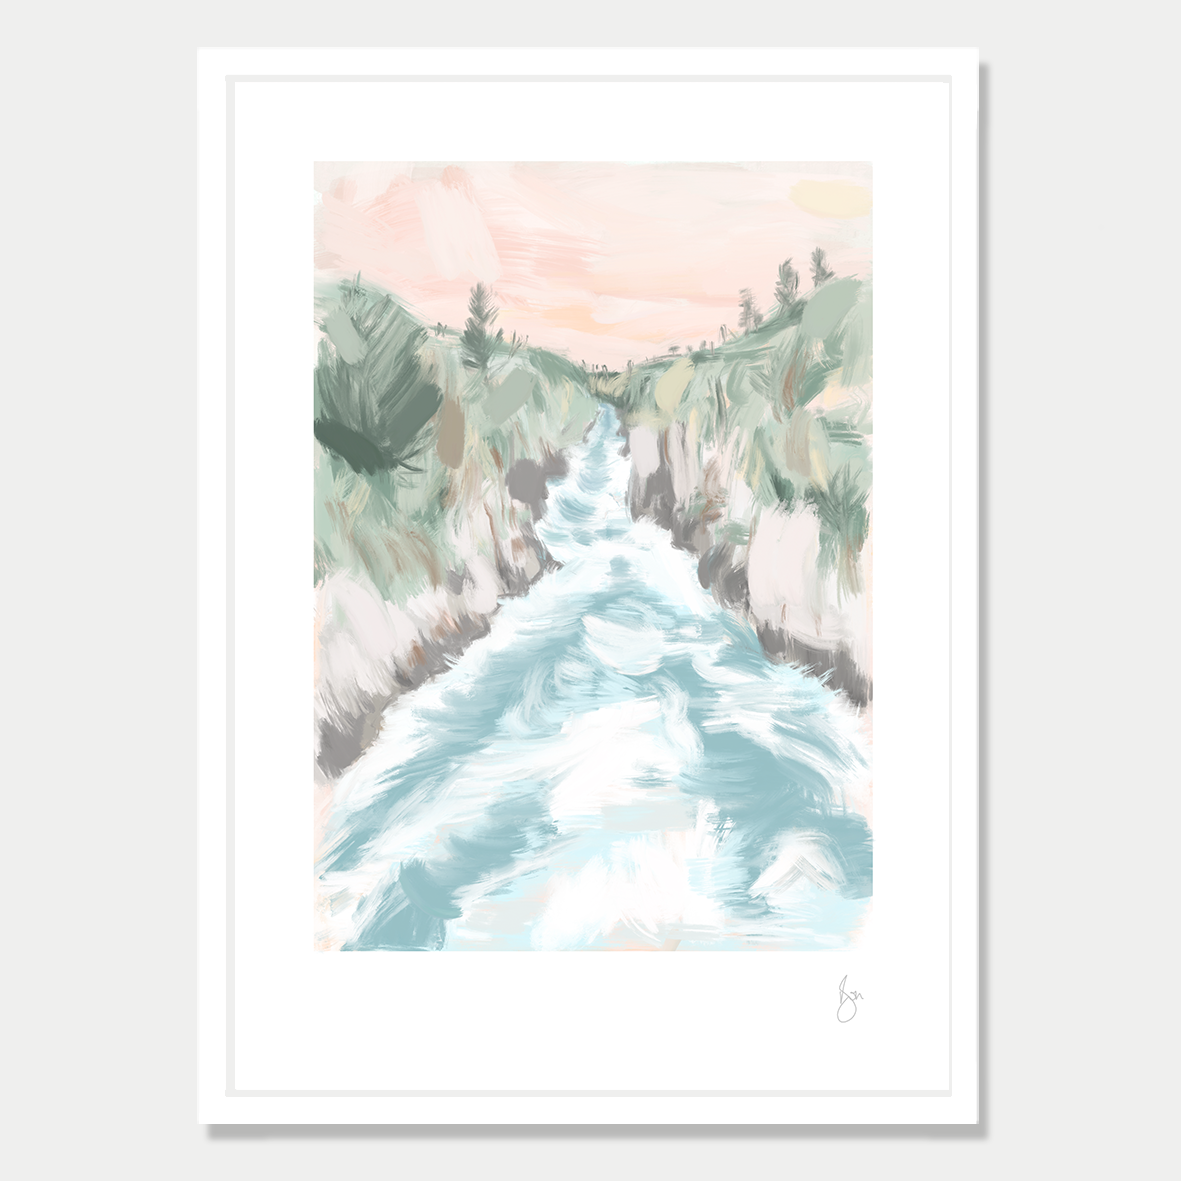 This art print is a still life of a the Huka Falls in New Zealand, by Bon Jung. Printed in New Zealand by endemicworld and framed in white.